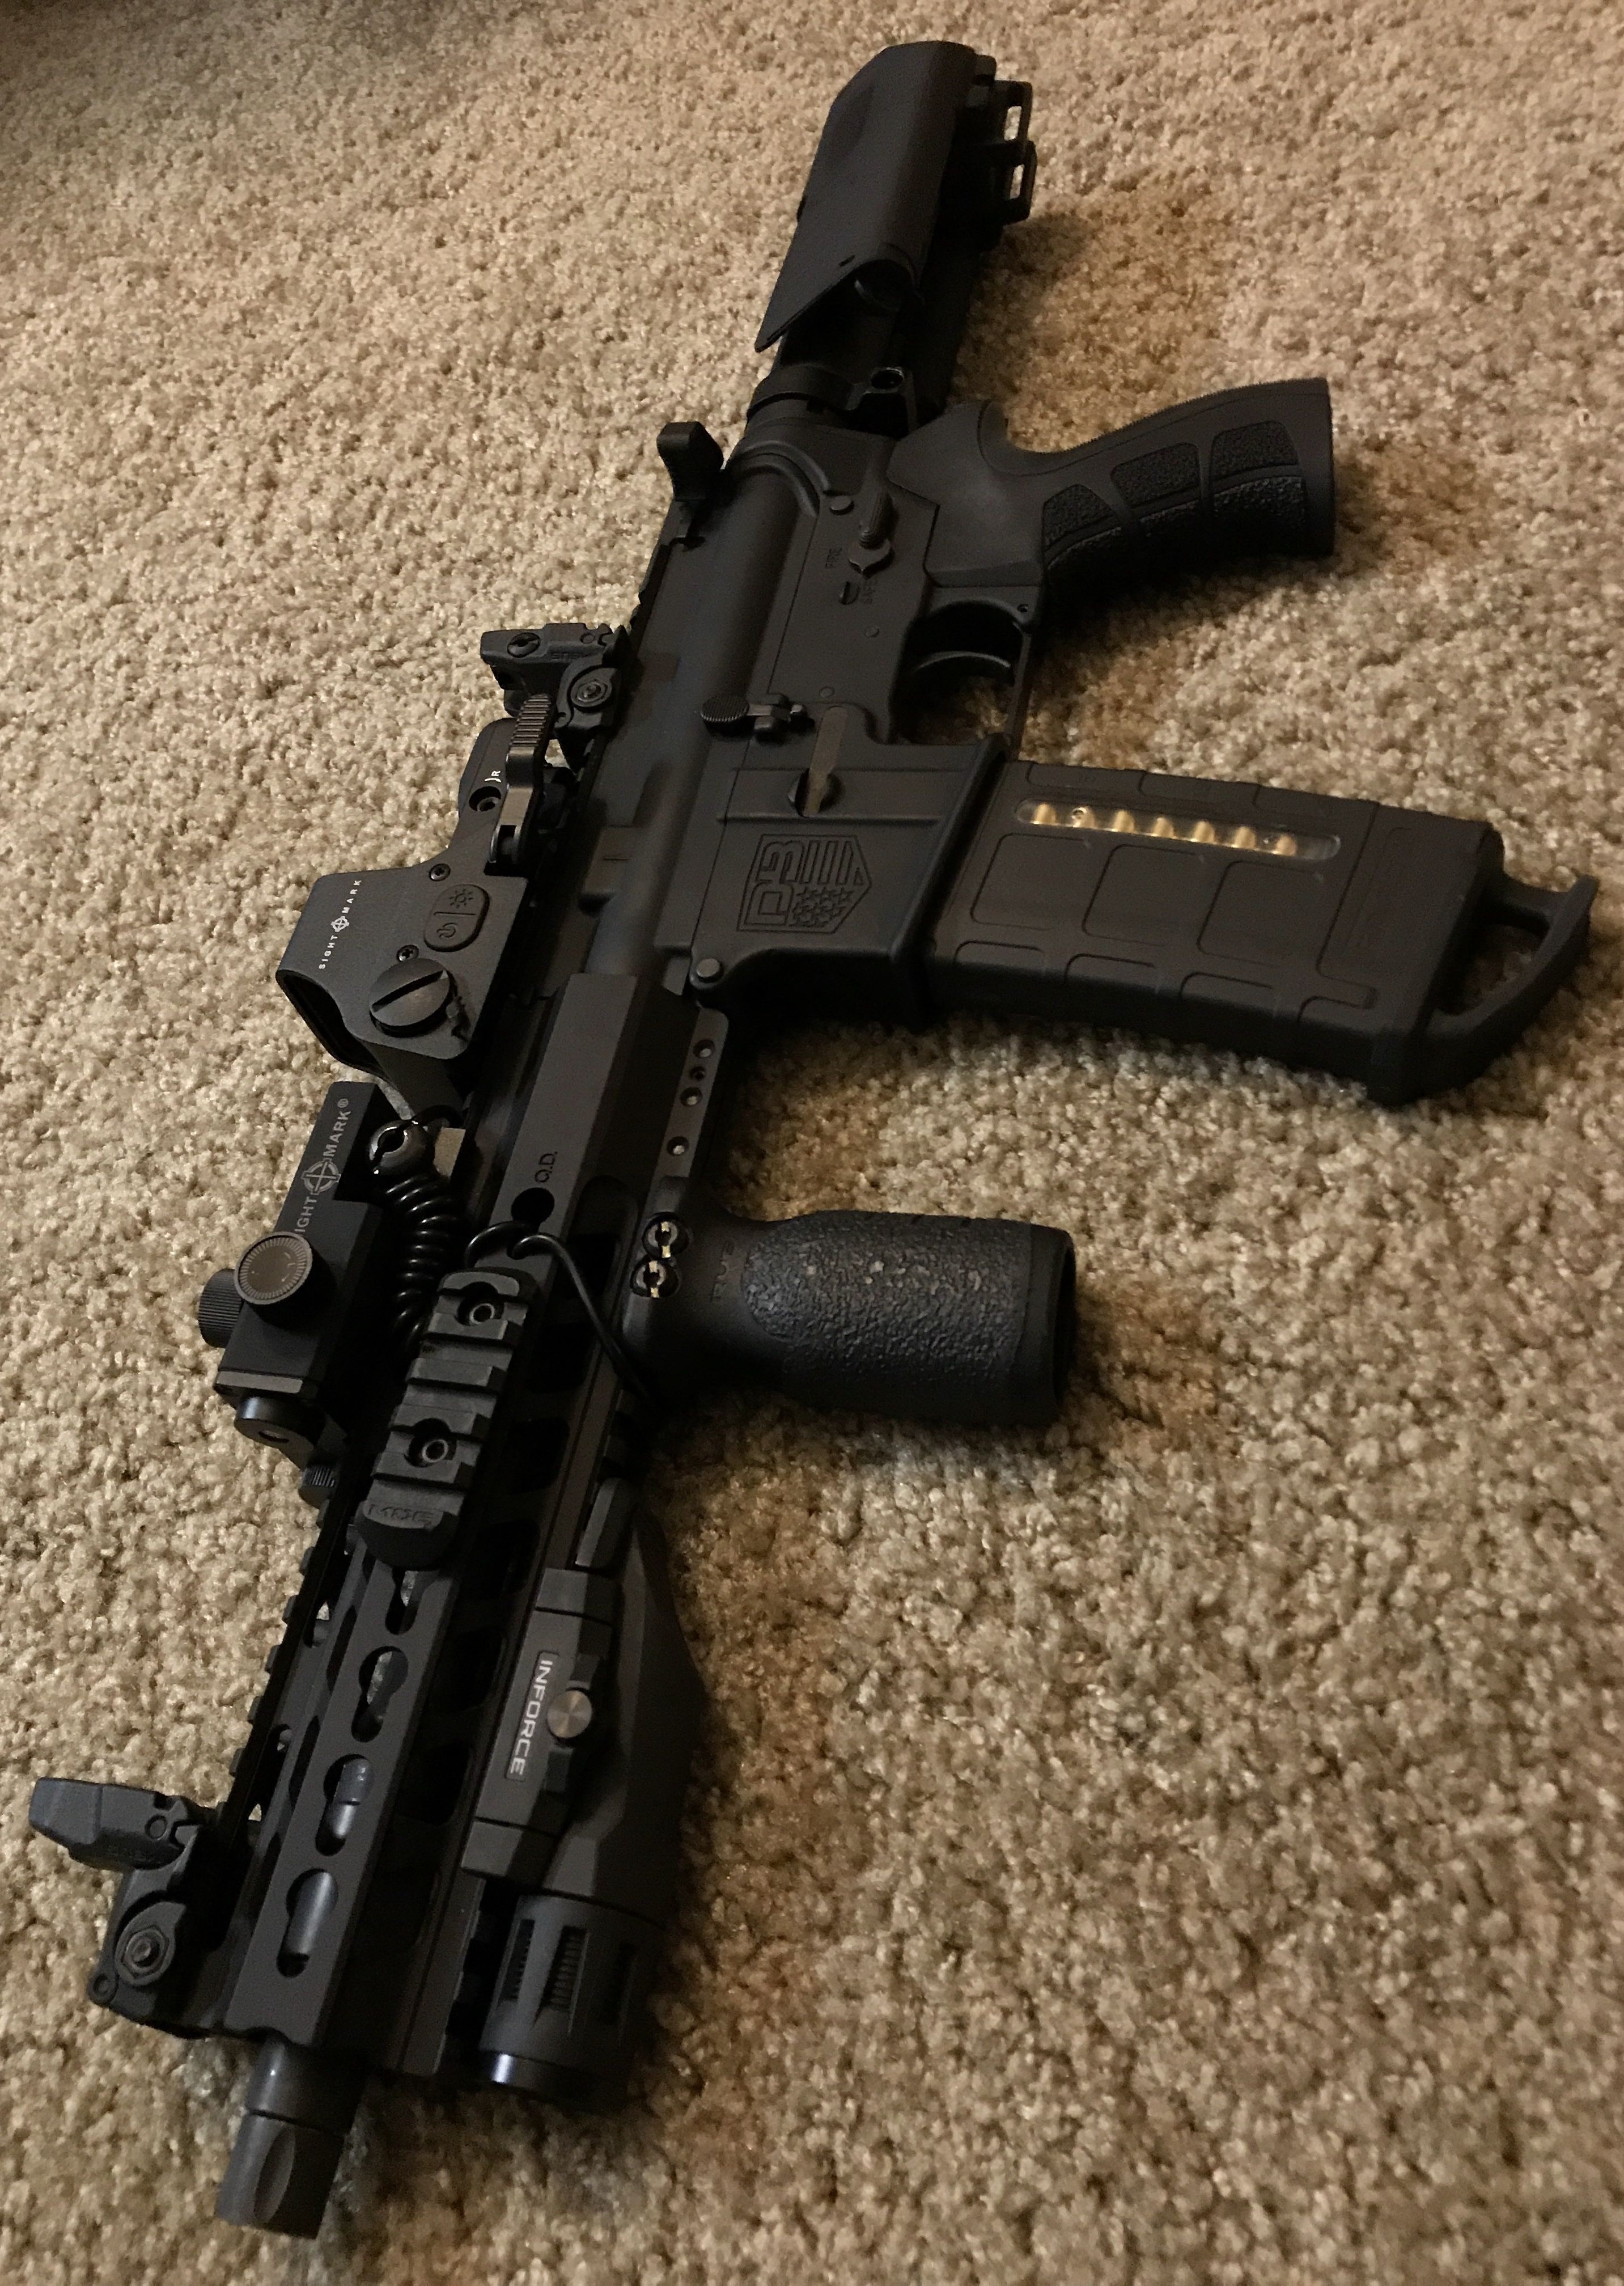 Papercraft Weapon Diamondback Db15 Pistol Upgraded to A New Sightmark Optic and